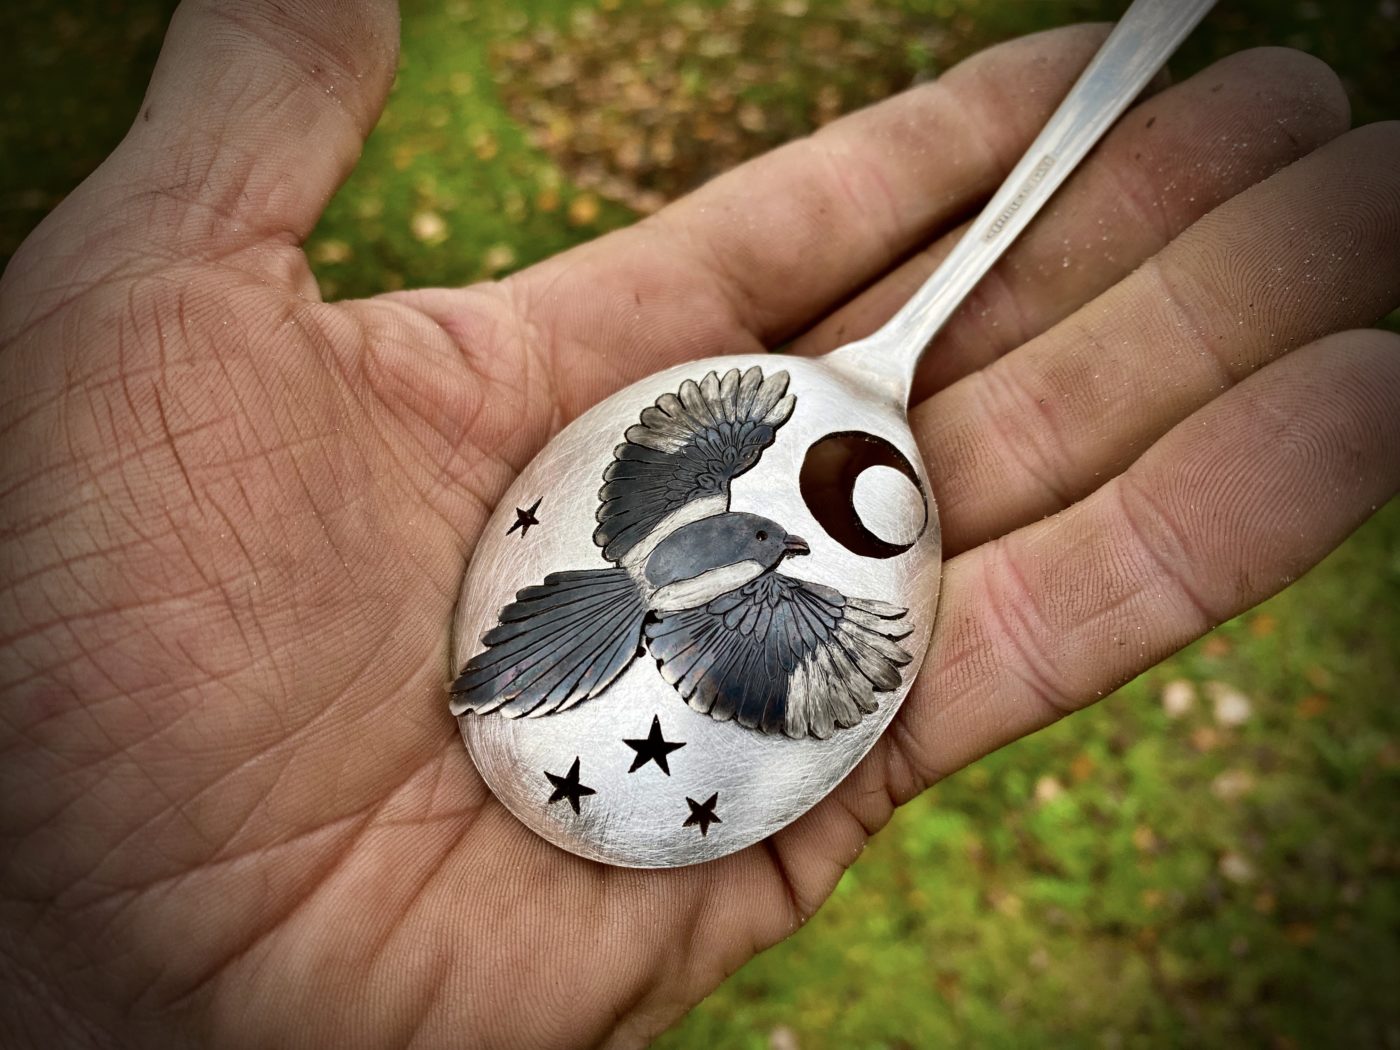 handmade Magpie brooch made from old spoon. Made in England with love and passion for treasure